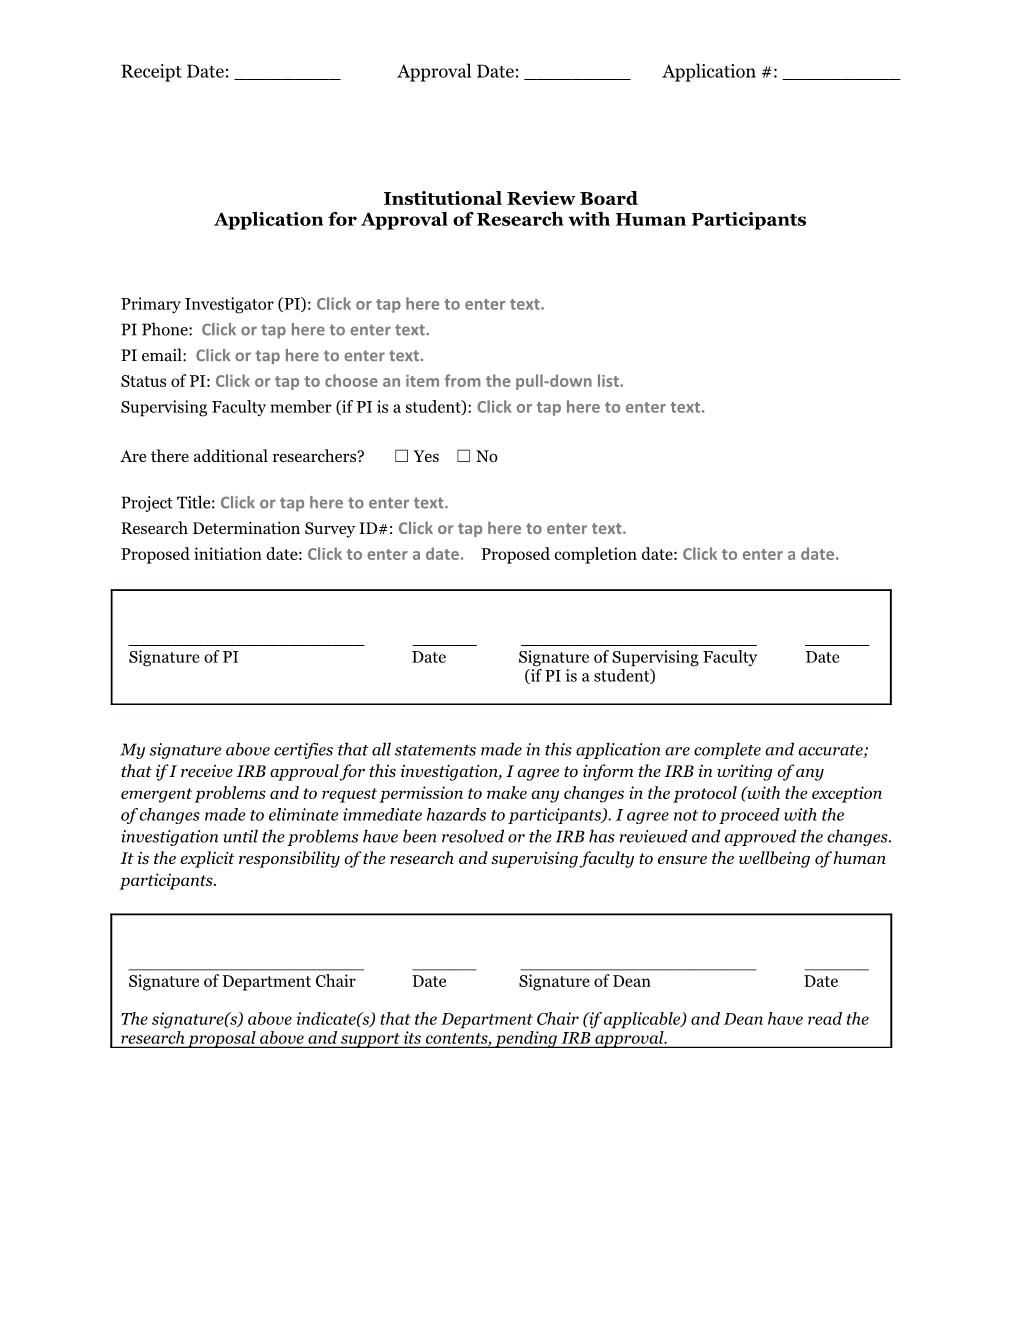 Application for Approval of Research with Human Participants